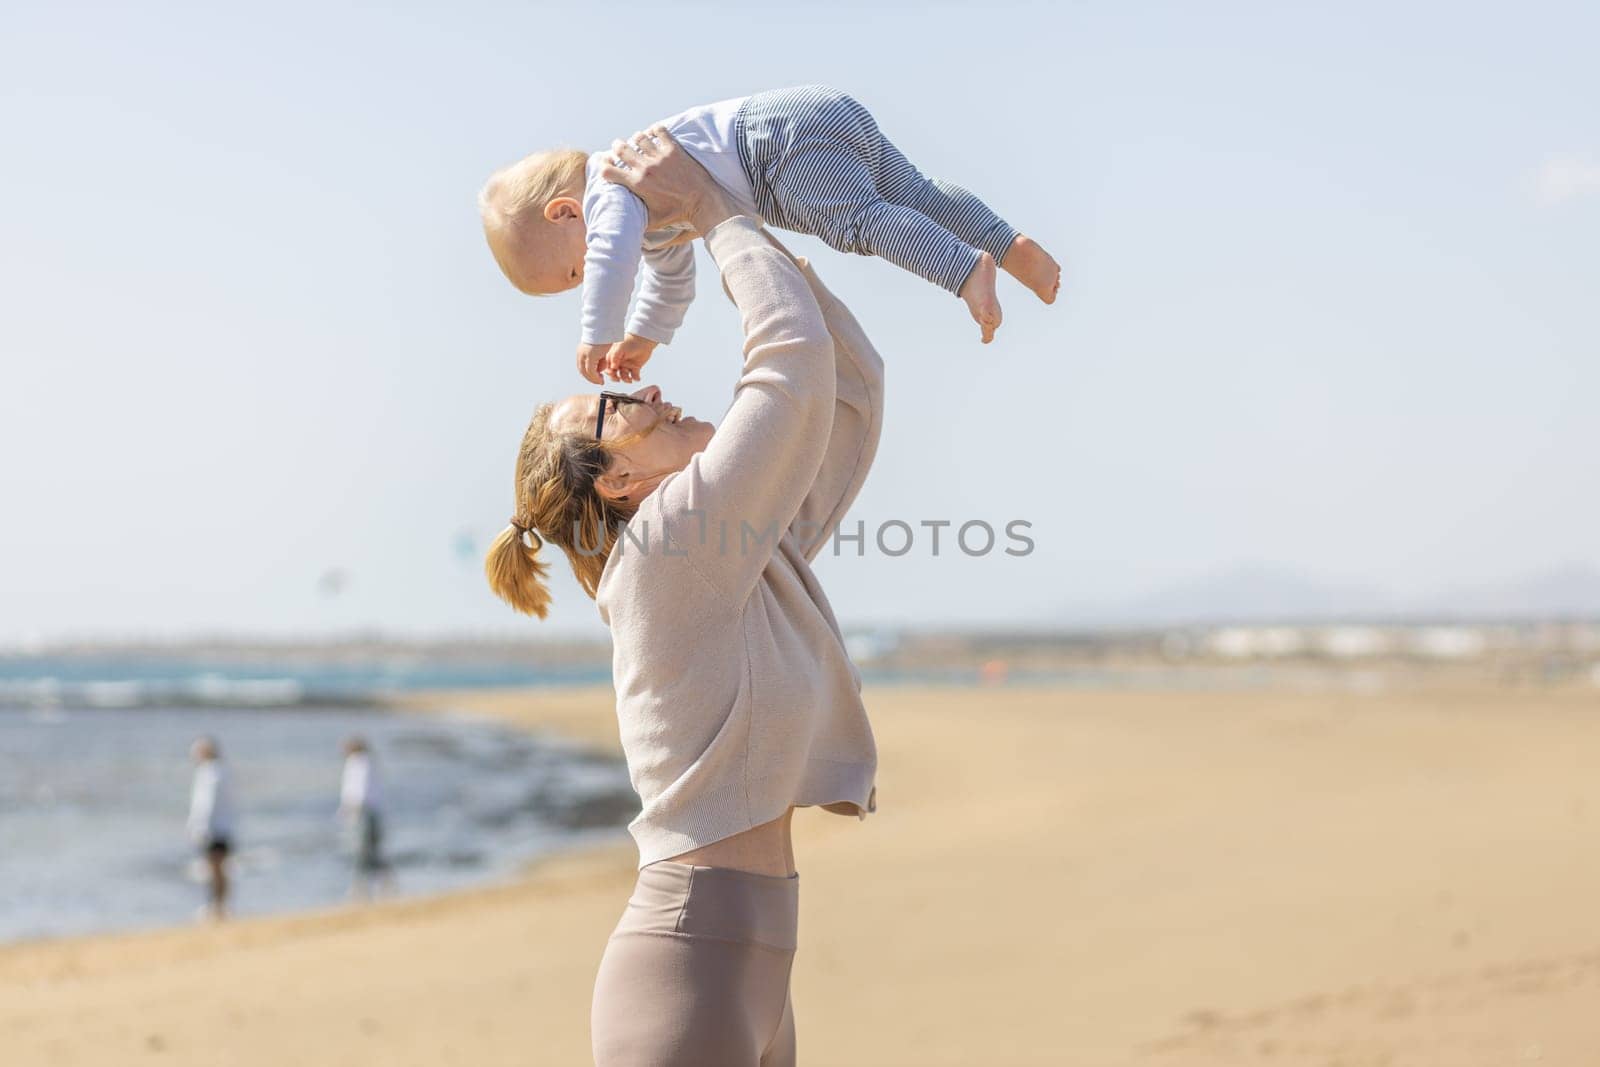 Mother enjoying summer vacations holding, playing and lifting his infant baby boy son high in the air on sandy beach on Lanzarote island, Spain. Family travel and vacations concept. by kasto